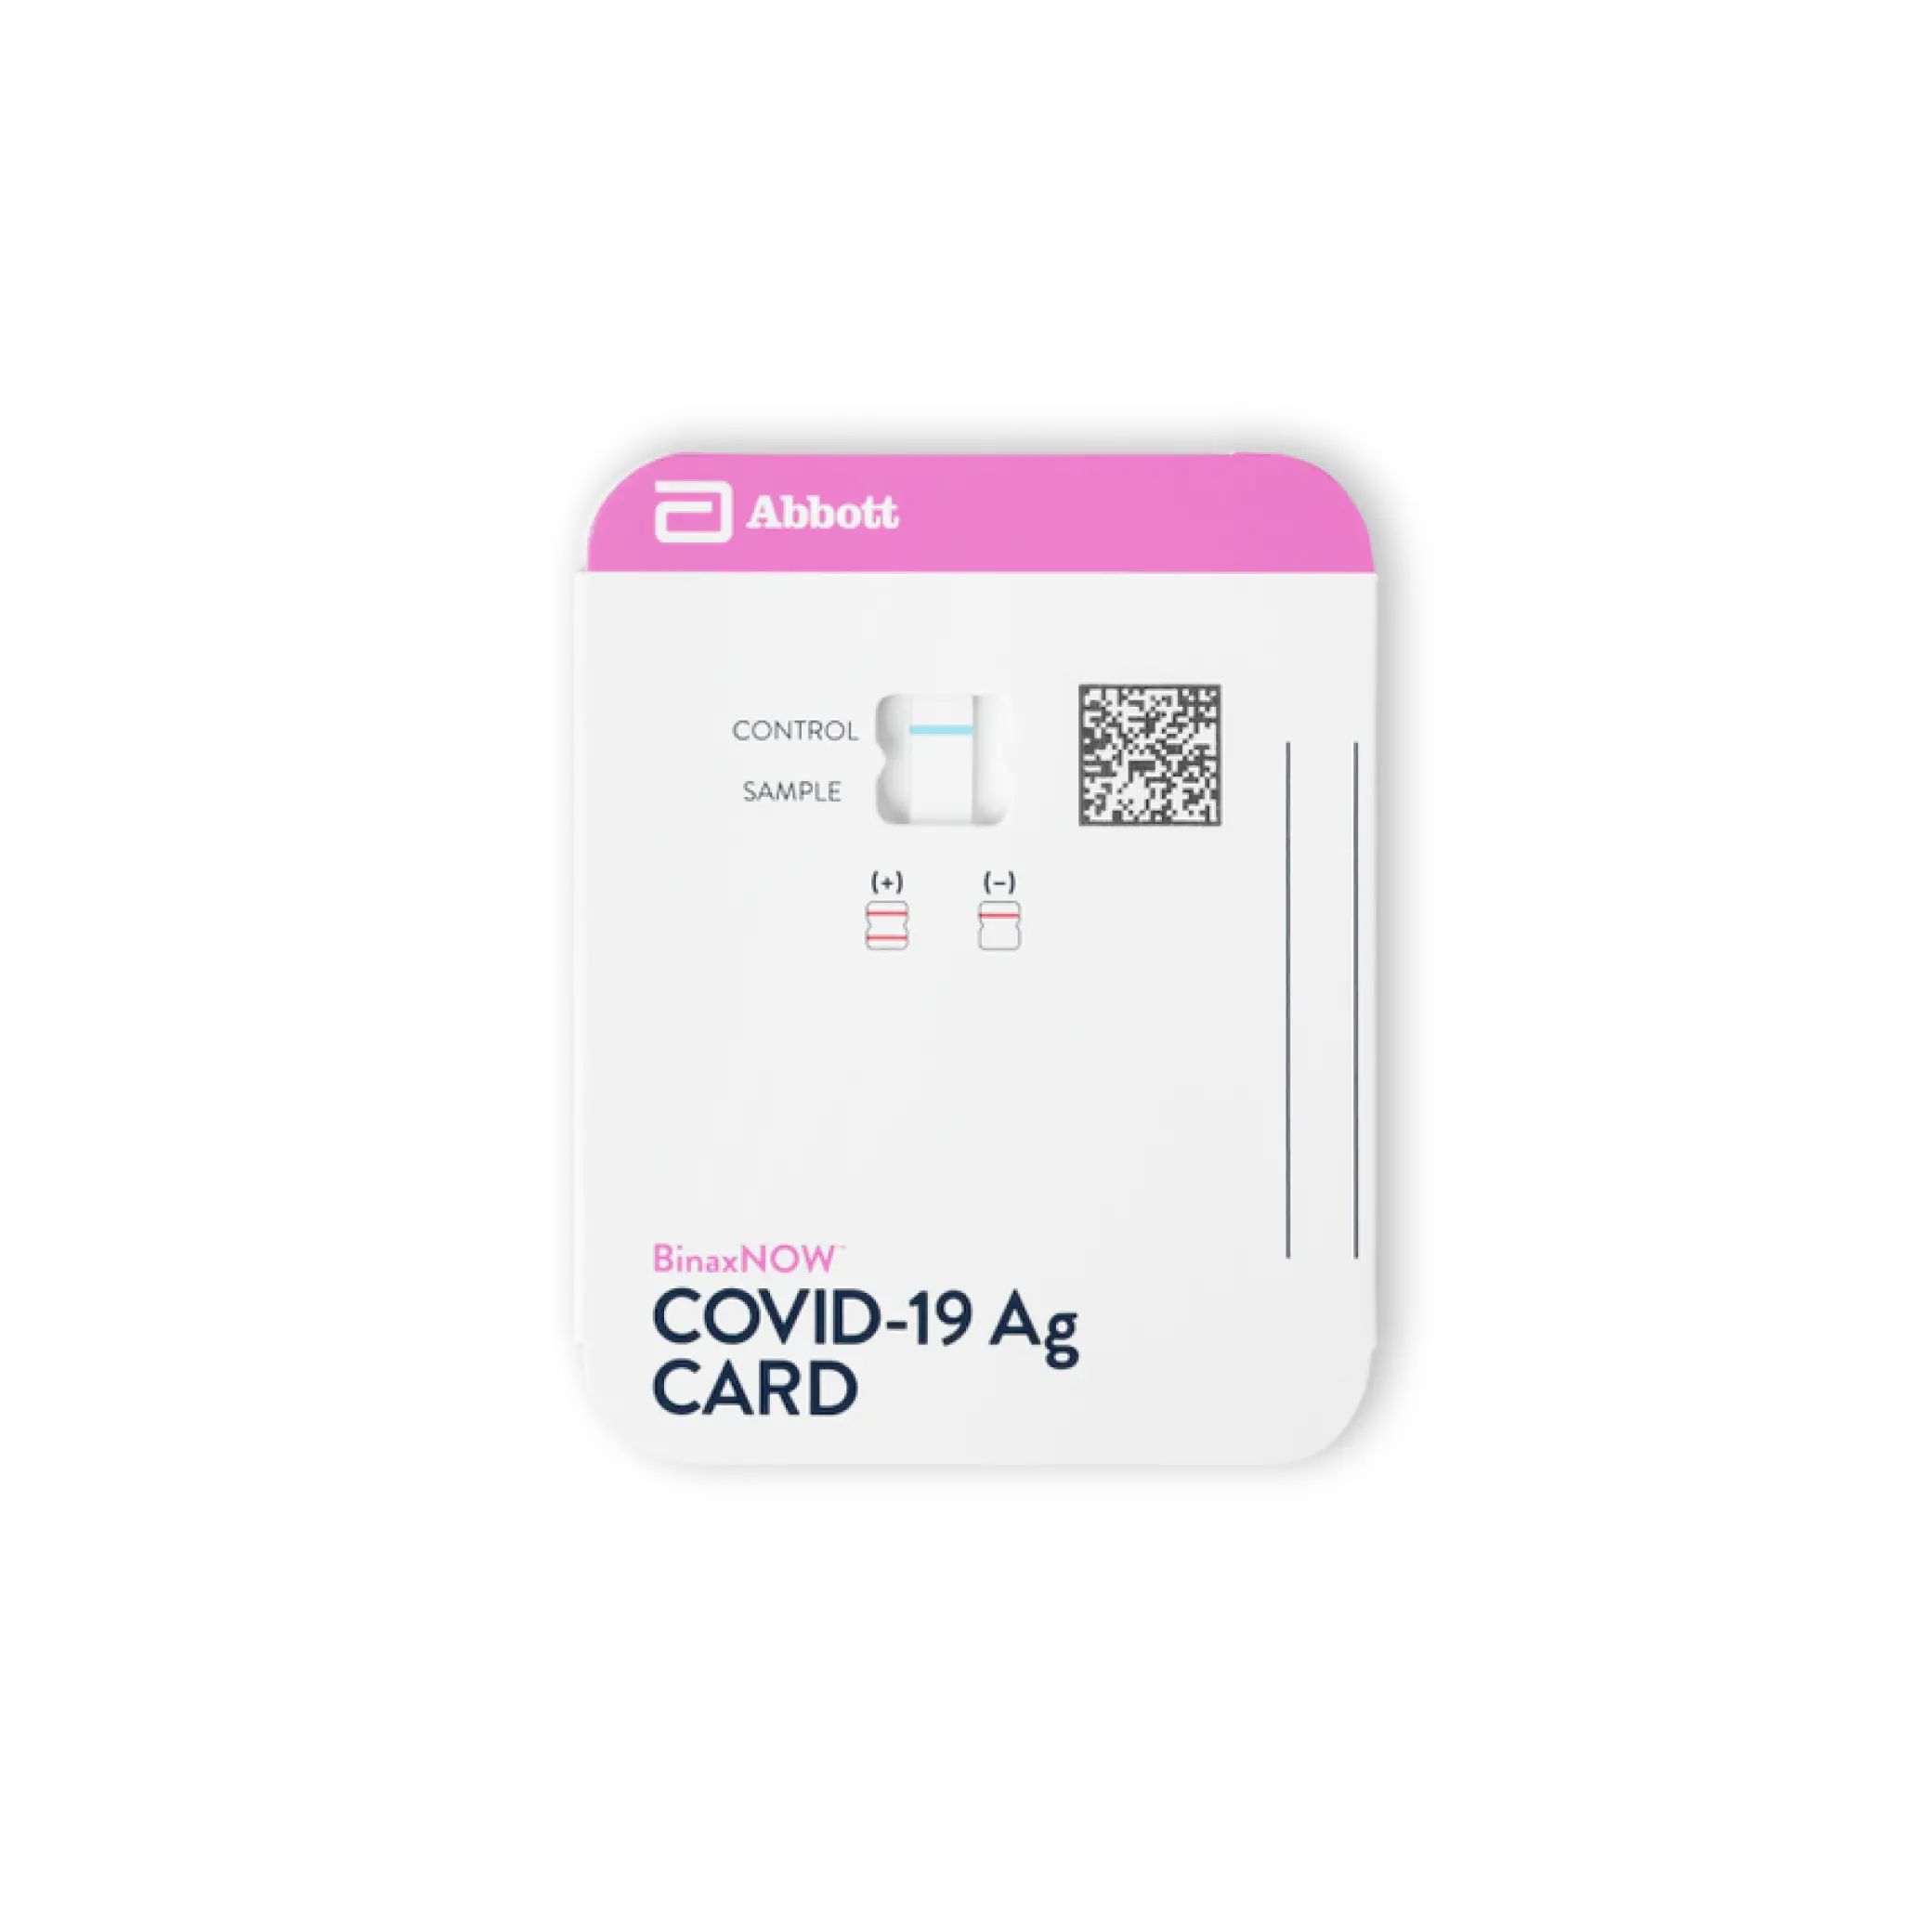 DISCAbbott BinaxNOW™ COVID-19 Antigen Card Home Test with eMed Telehealth Services - 1 Pack for Royal Caribbean